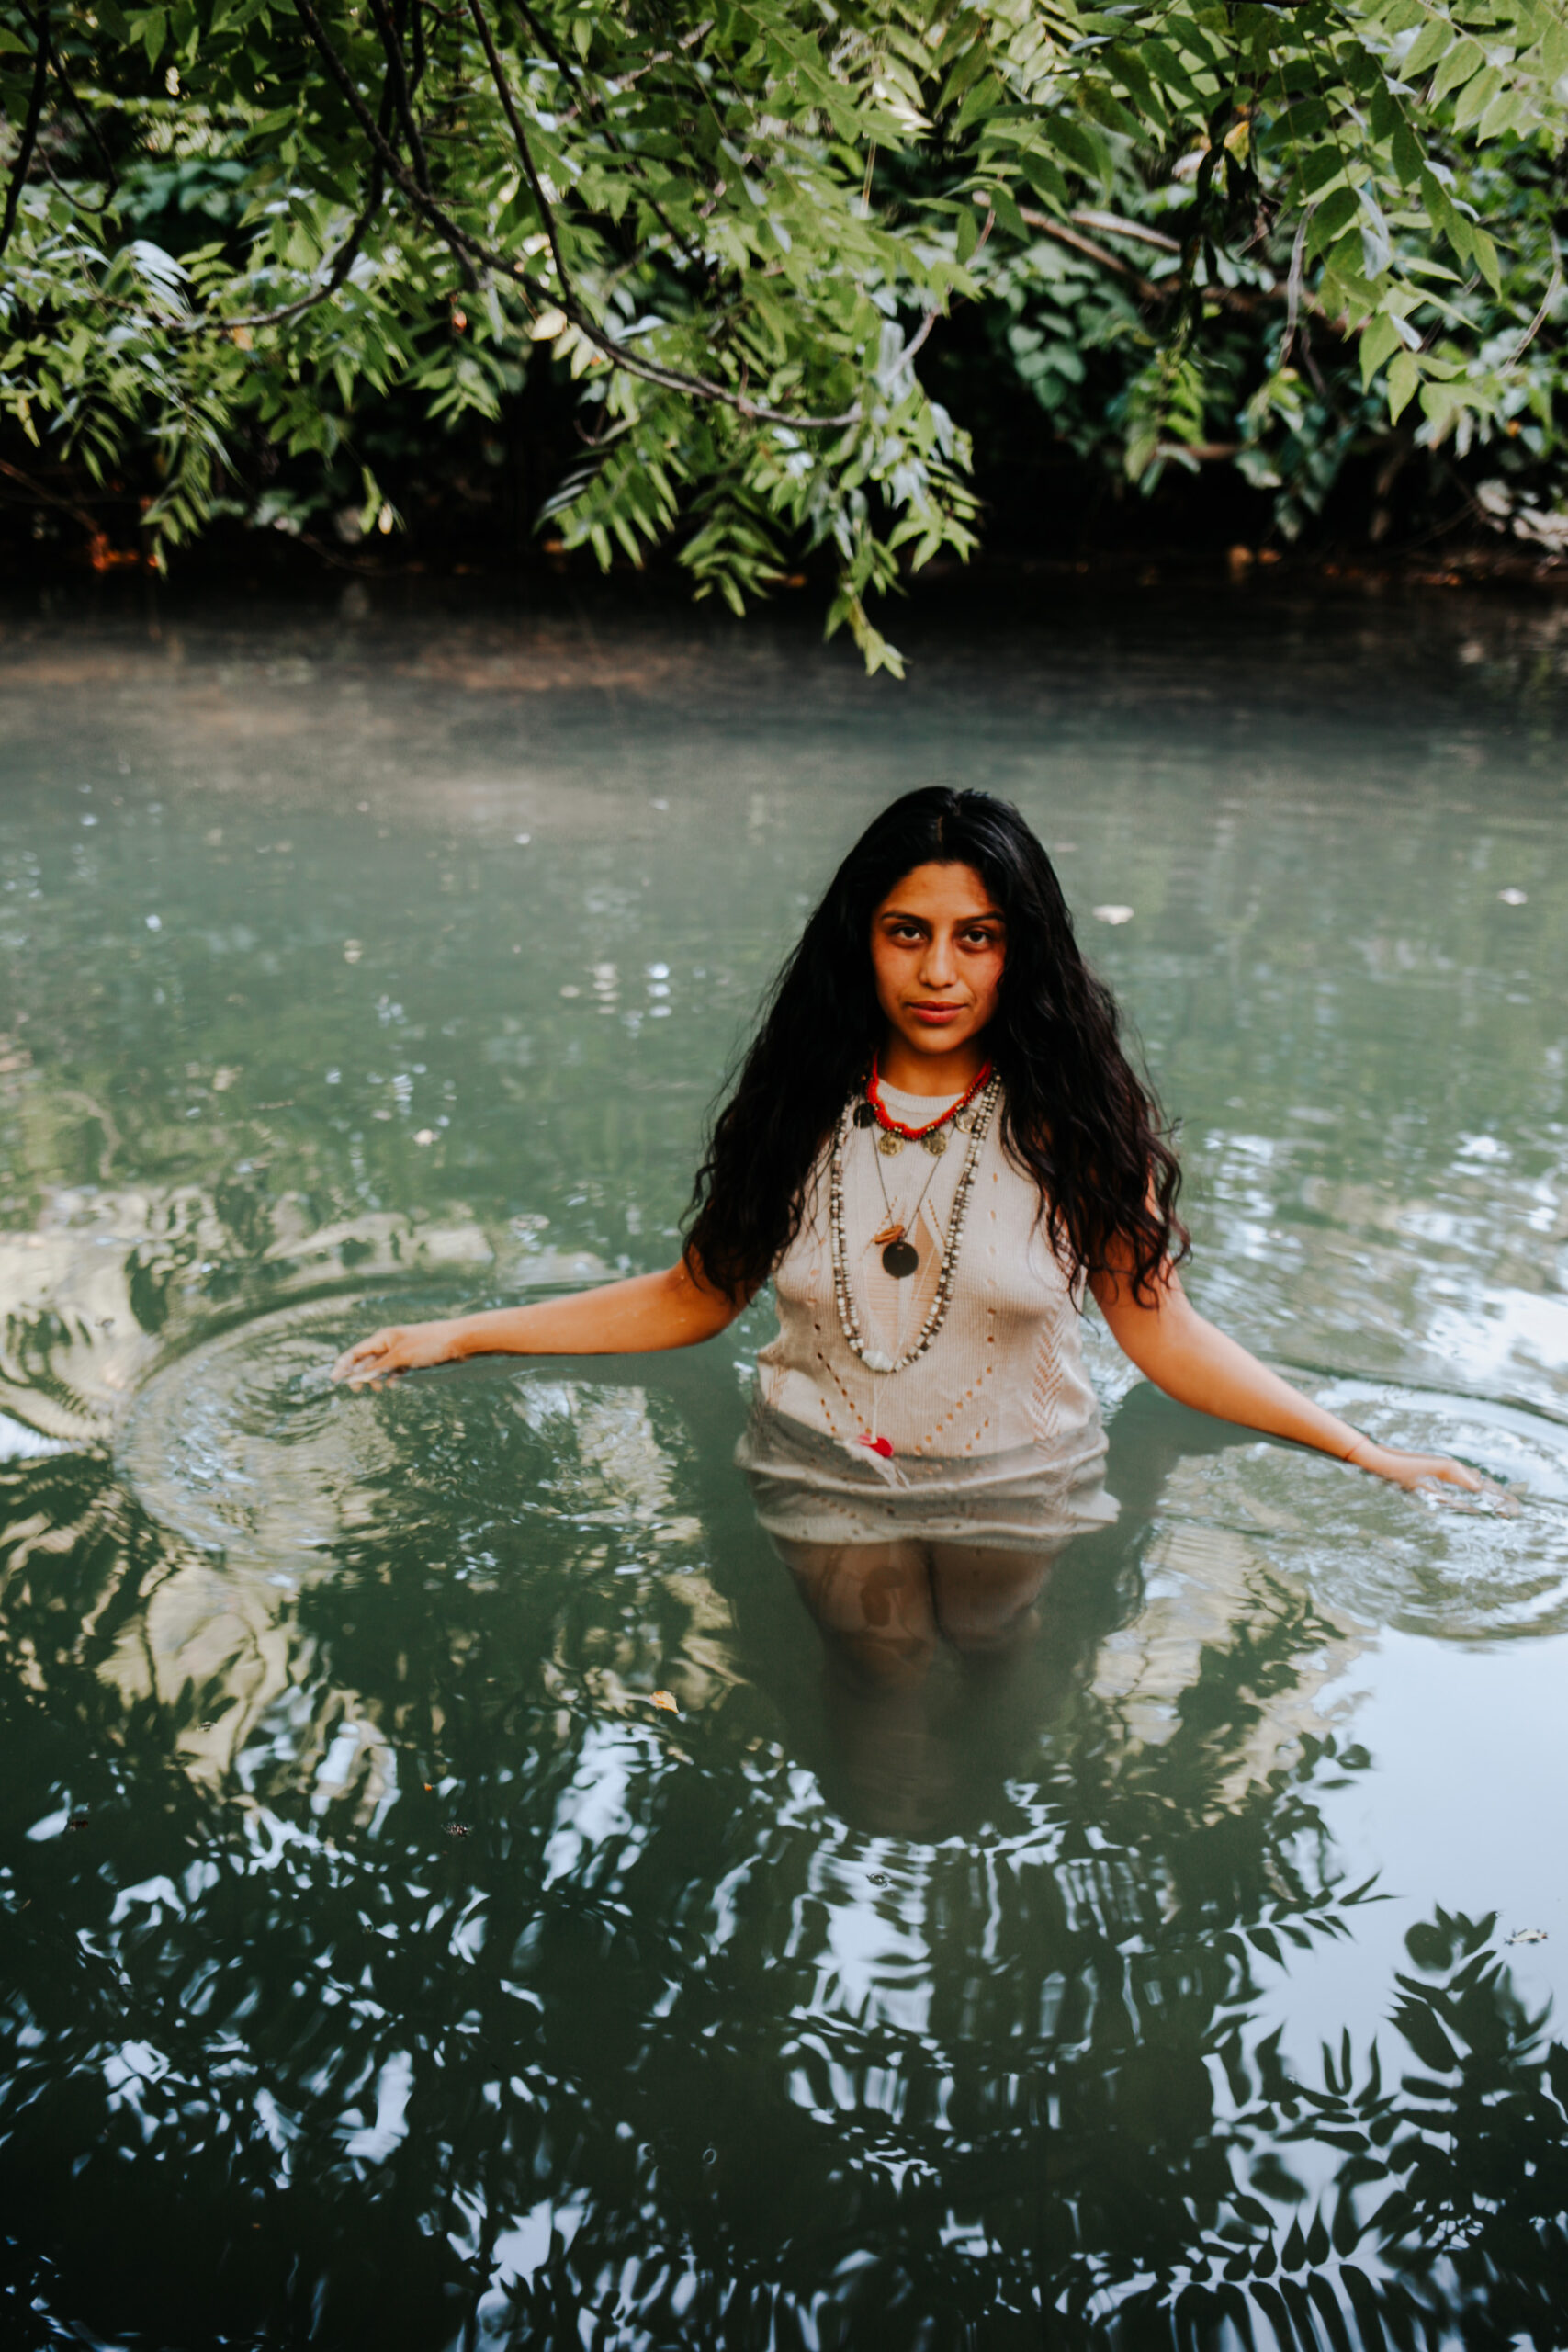 Leslie Avila, wearing white dress and necklaces, standing in waste-high water, greenery in background and reflected in the water, her out hands to her sides gently moving the water